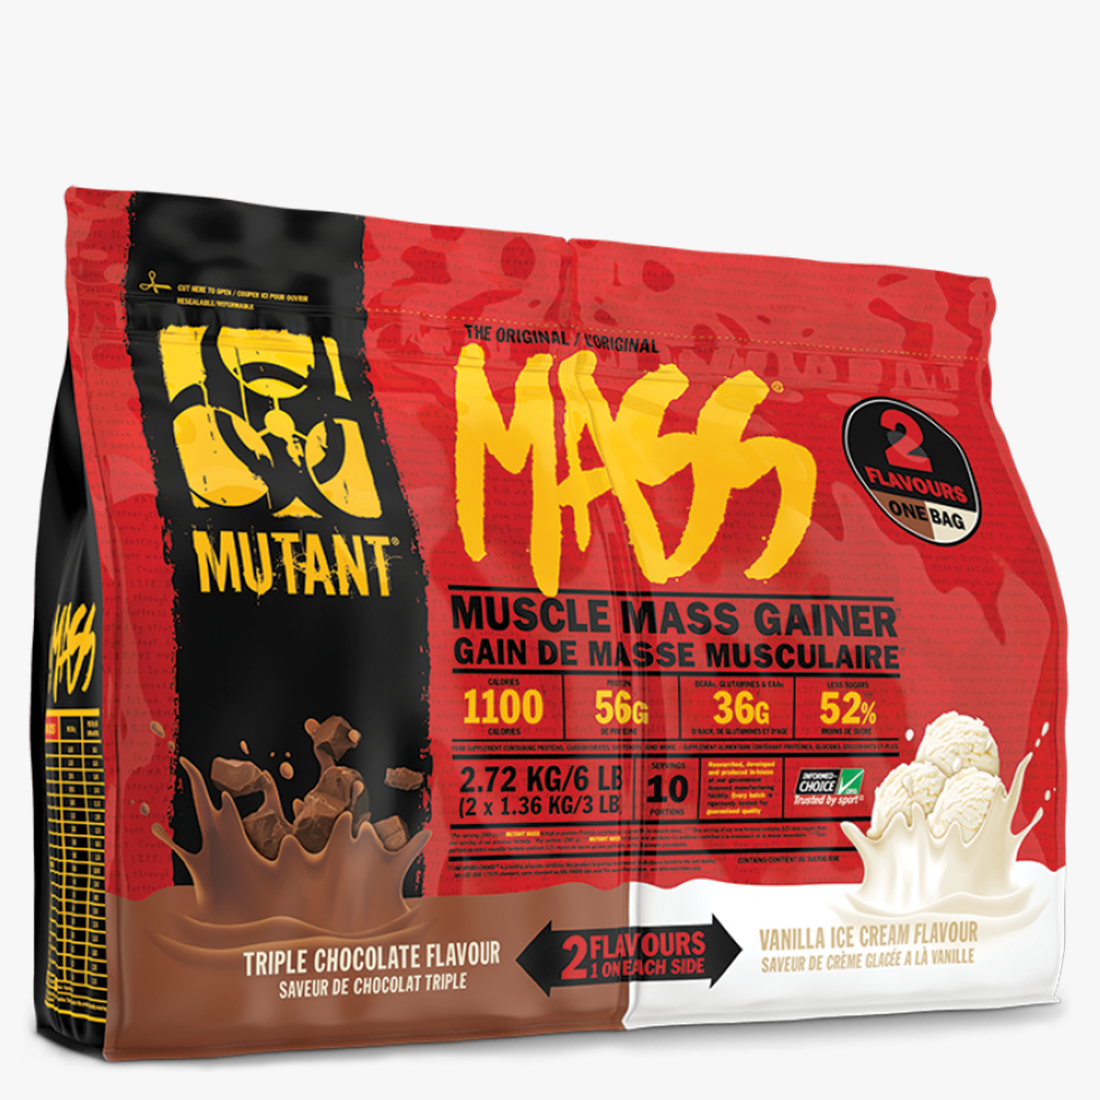 St kop Følsom Mutant - Mass Dual Chamber - Promote your muscle growth - TRU·FIT